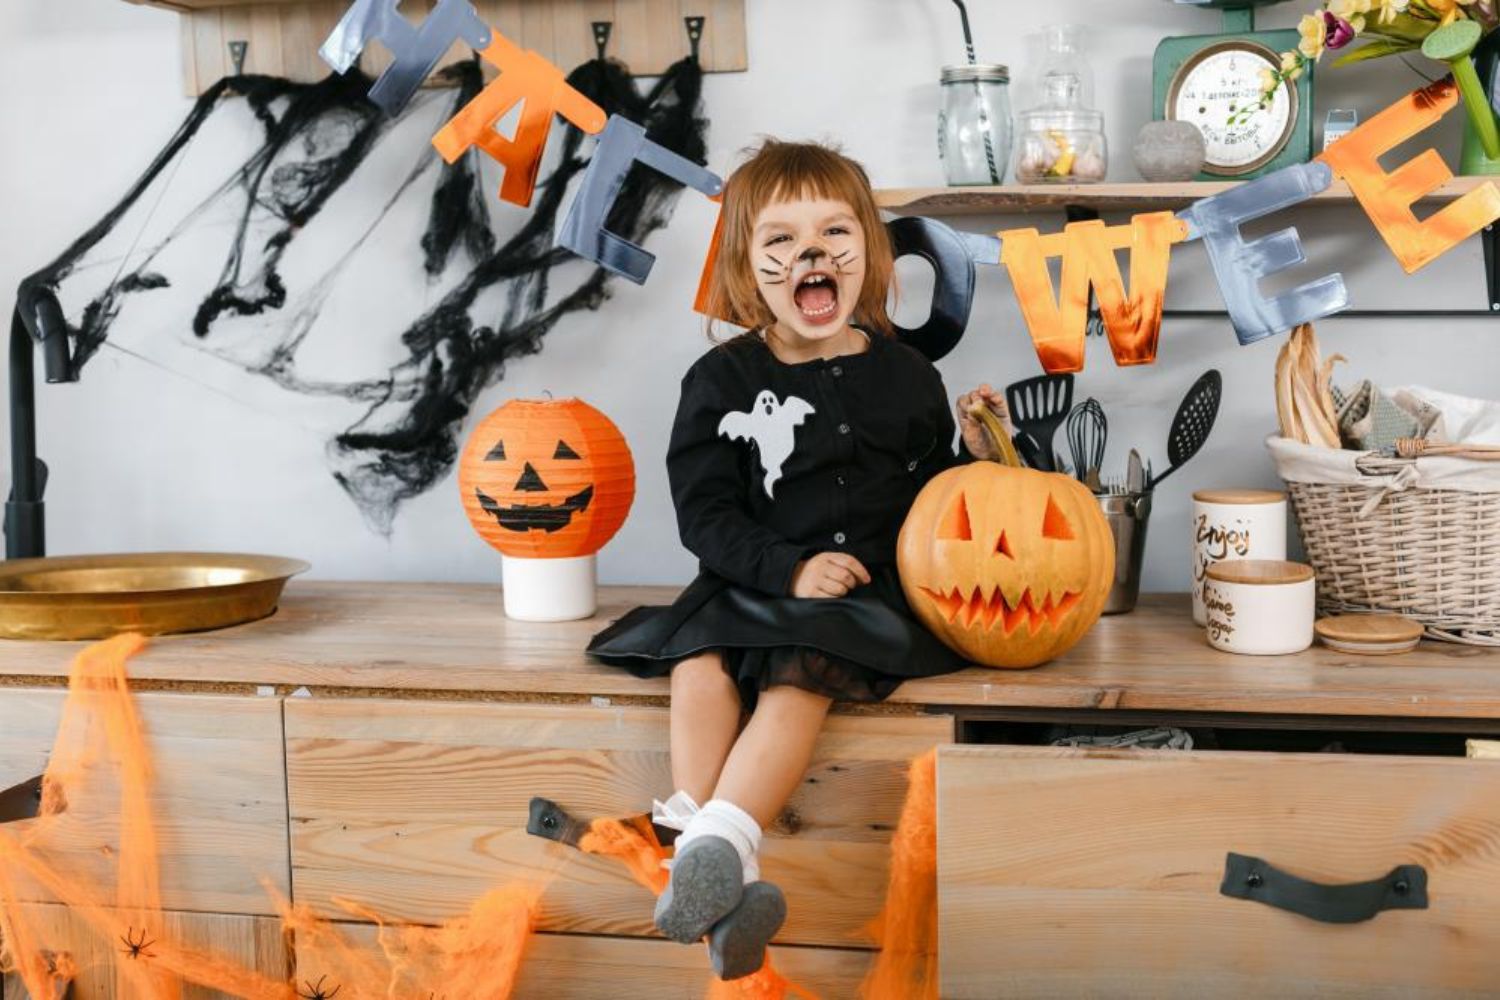 little girl's Halloween photo with curved pumpkins